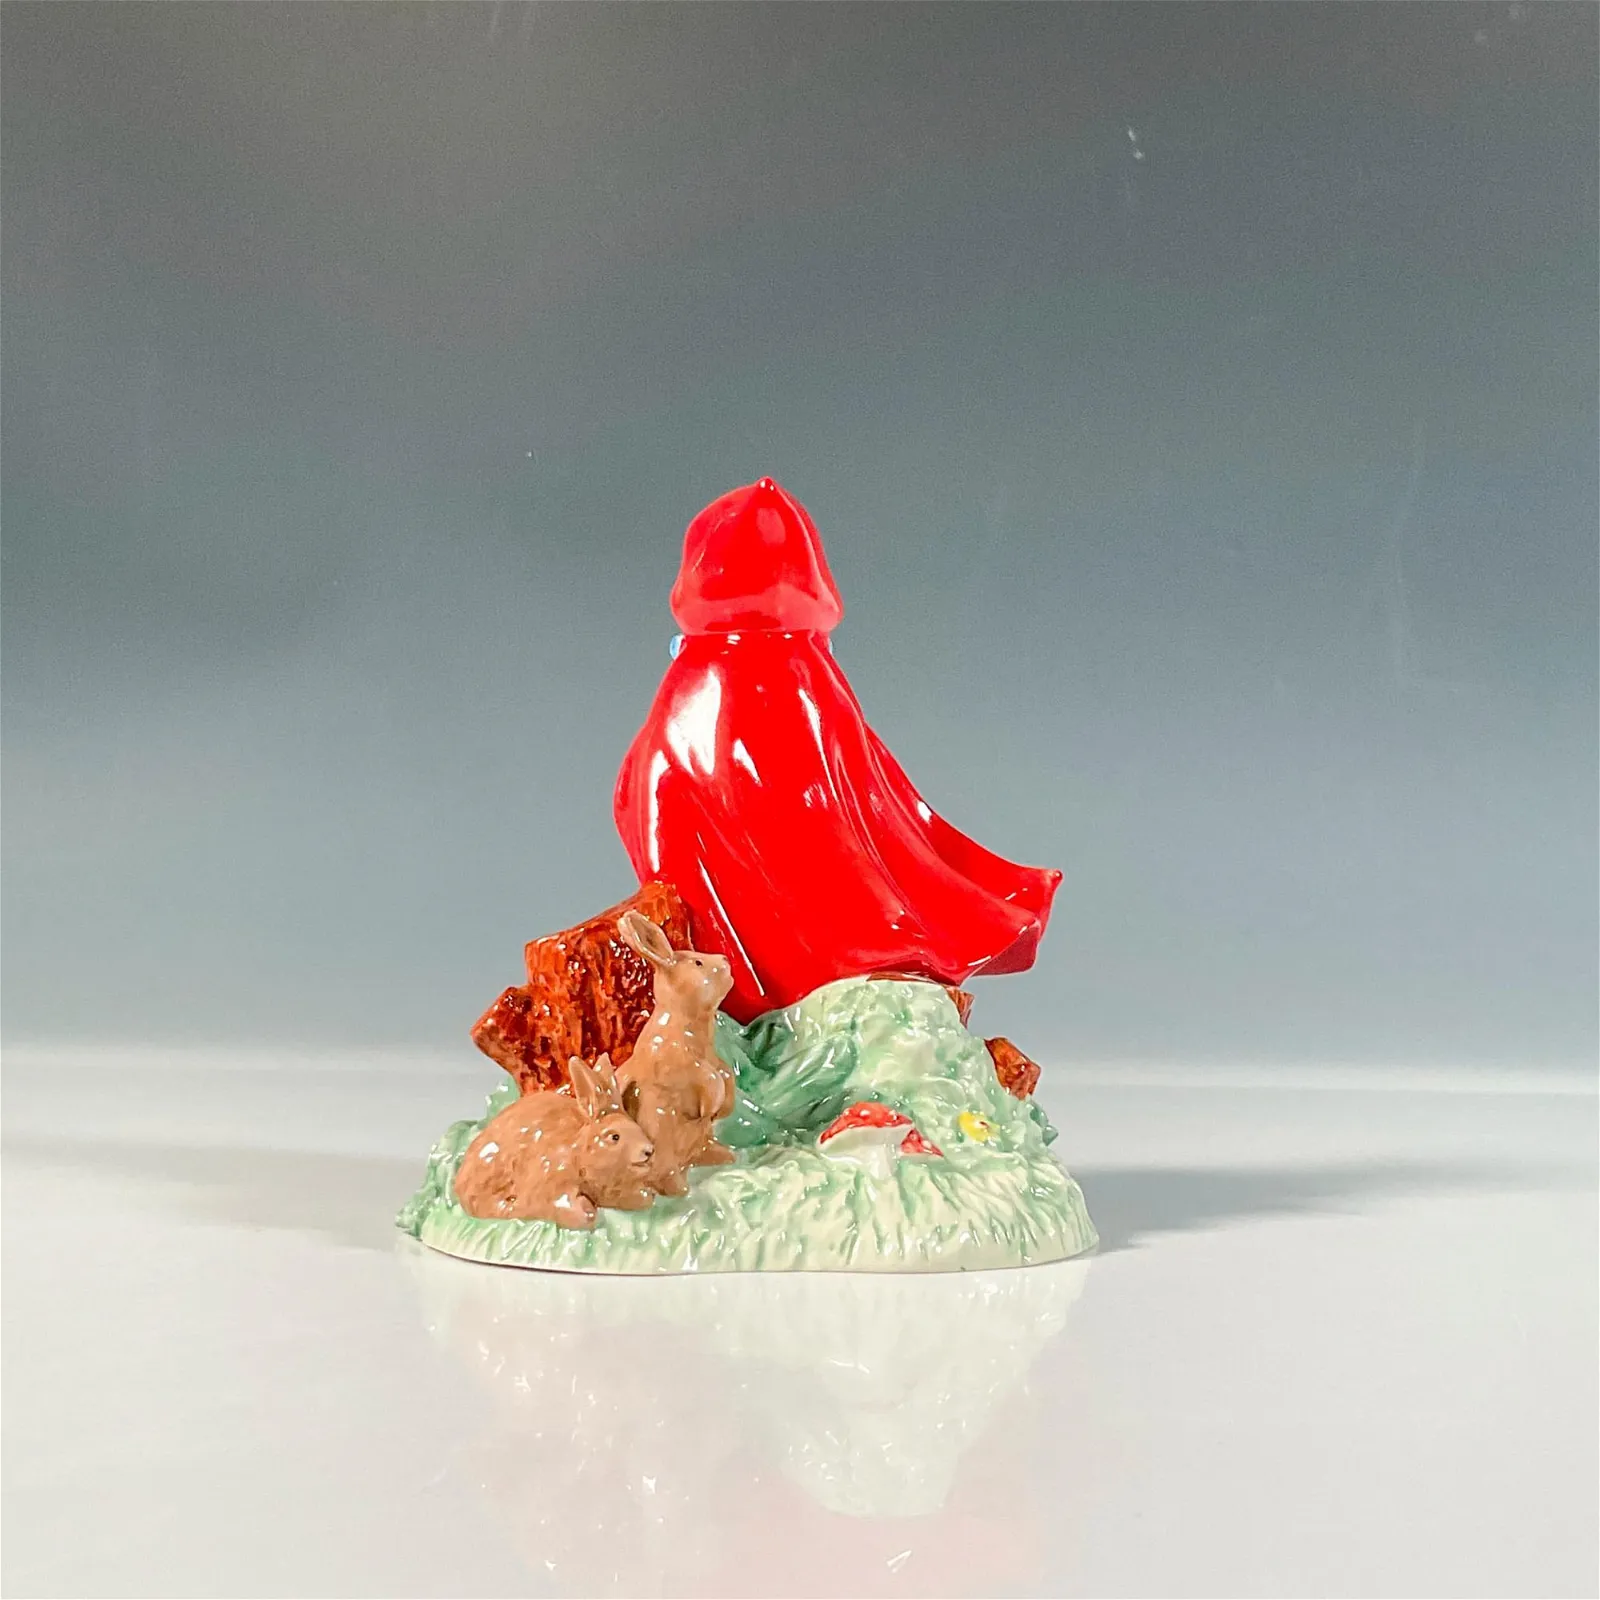 Royal Doulton Prototype Figurine, Little Red Riding Hood